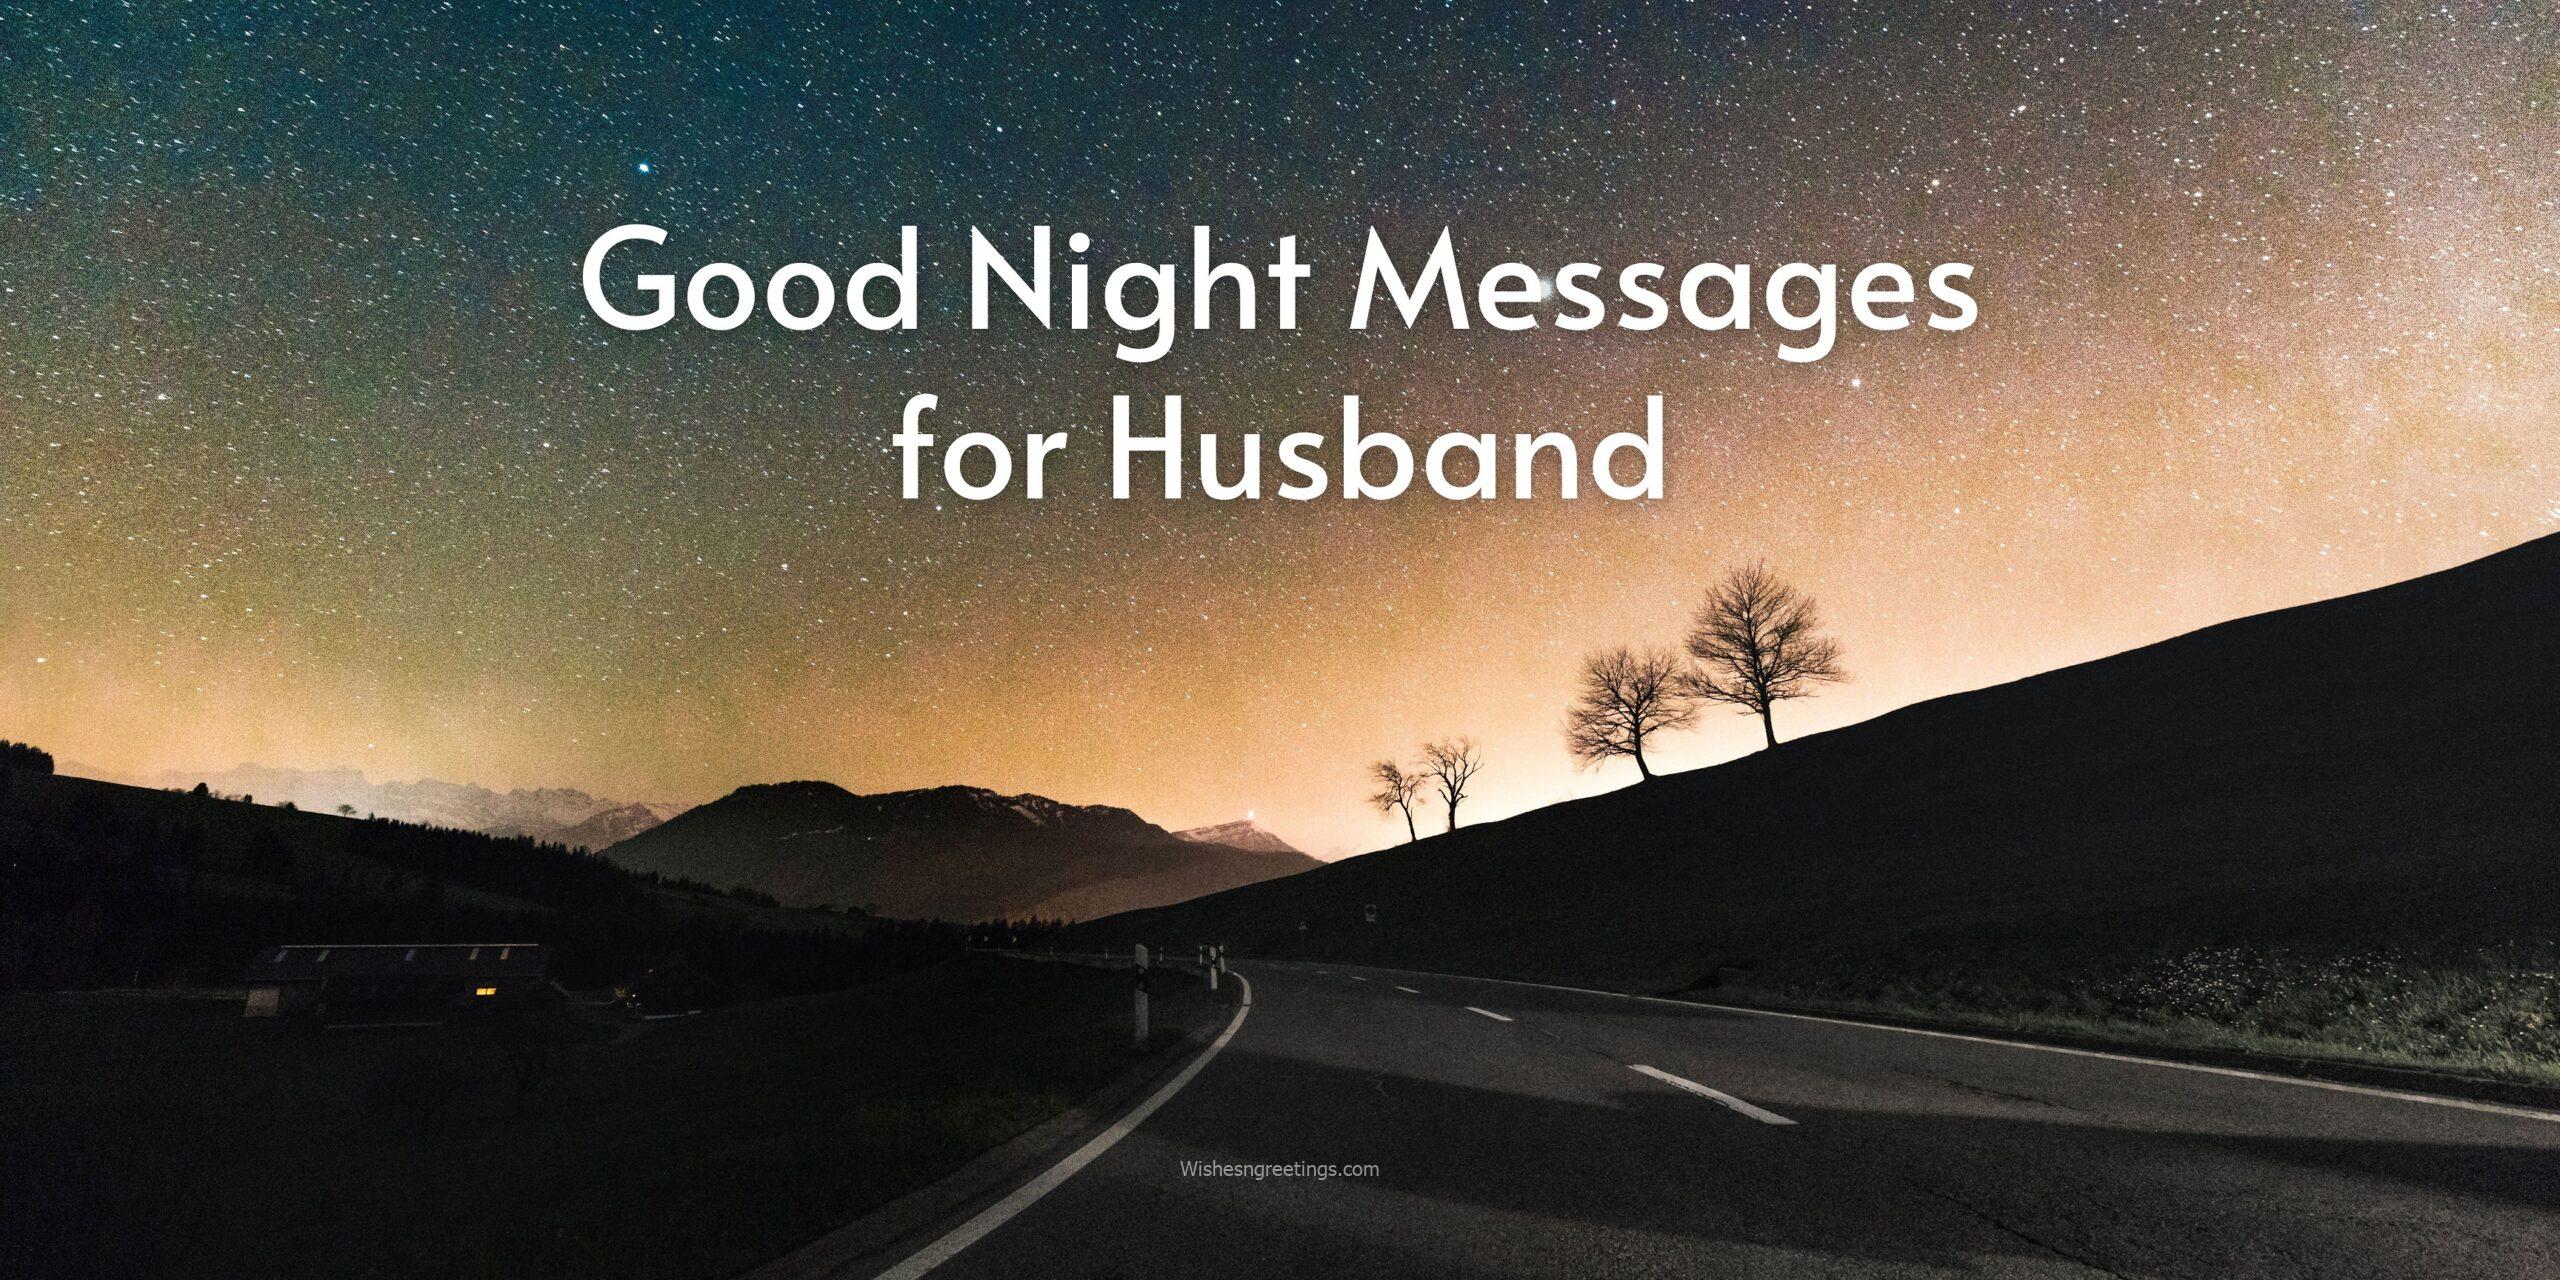 Good Night Messages for Husband